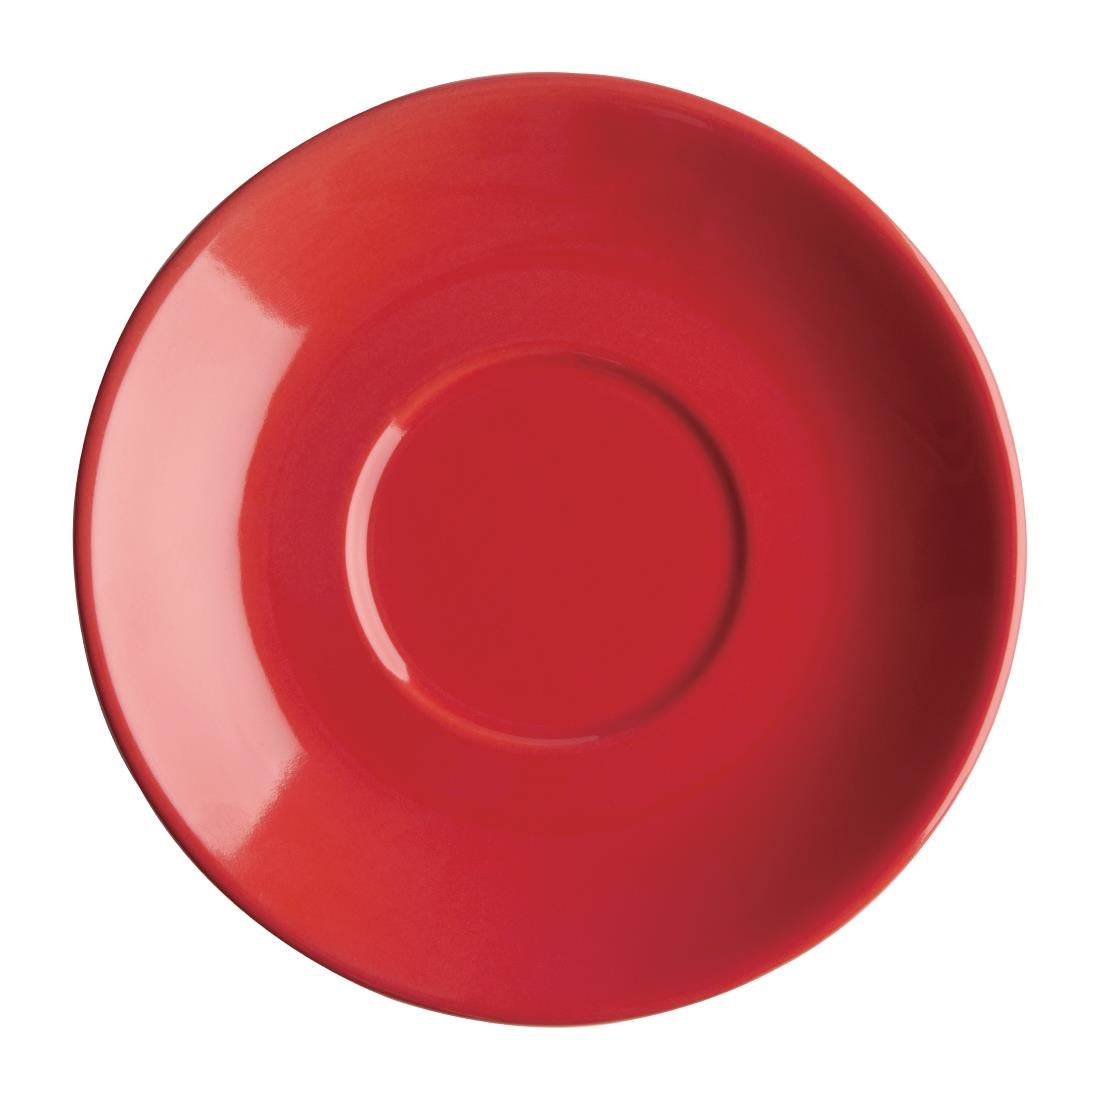 FF995 Olympia Cafe Red Saucer (Fits FF990) - 135mm 5 3/10" (Box 12)